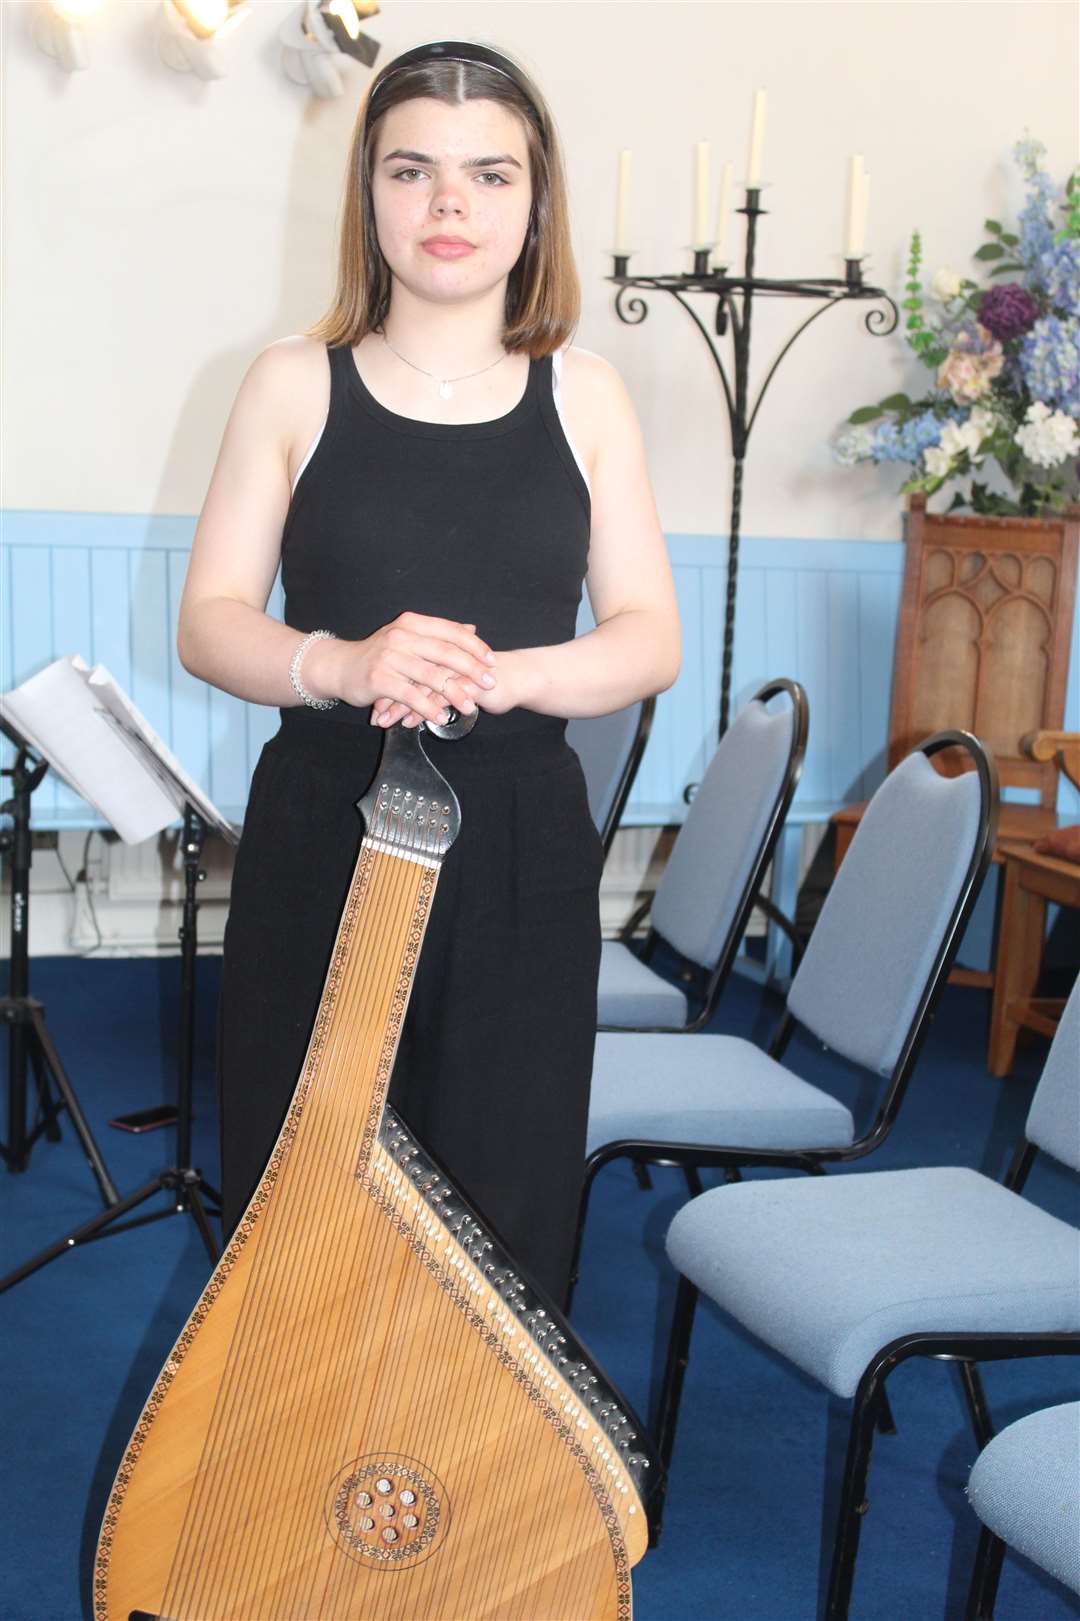 Ukrainian Alisa Anhel brought an unusual contributuion to Saturday night's Inverurie Music concert in St Andrews church with Ukraine's national instrument, the Bandura